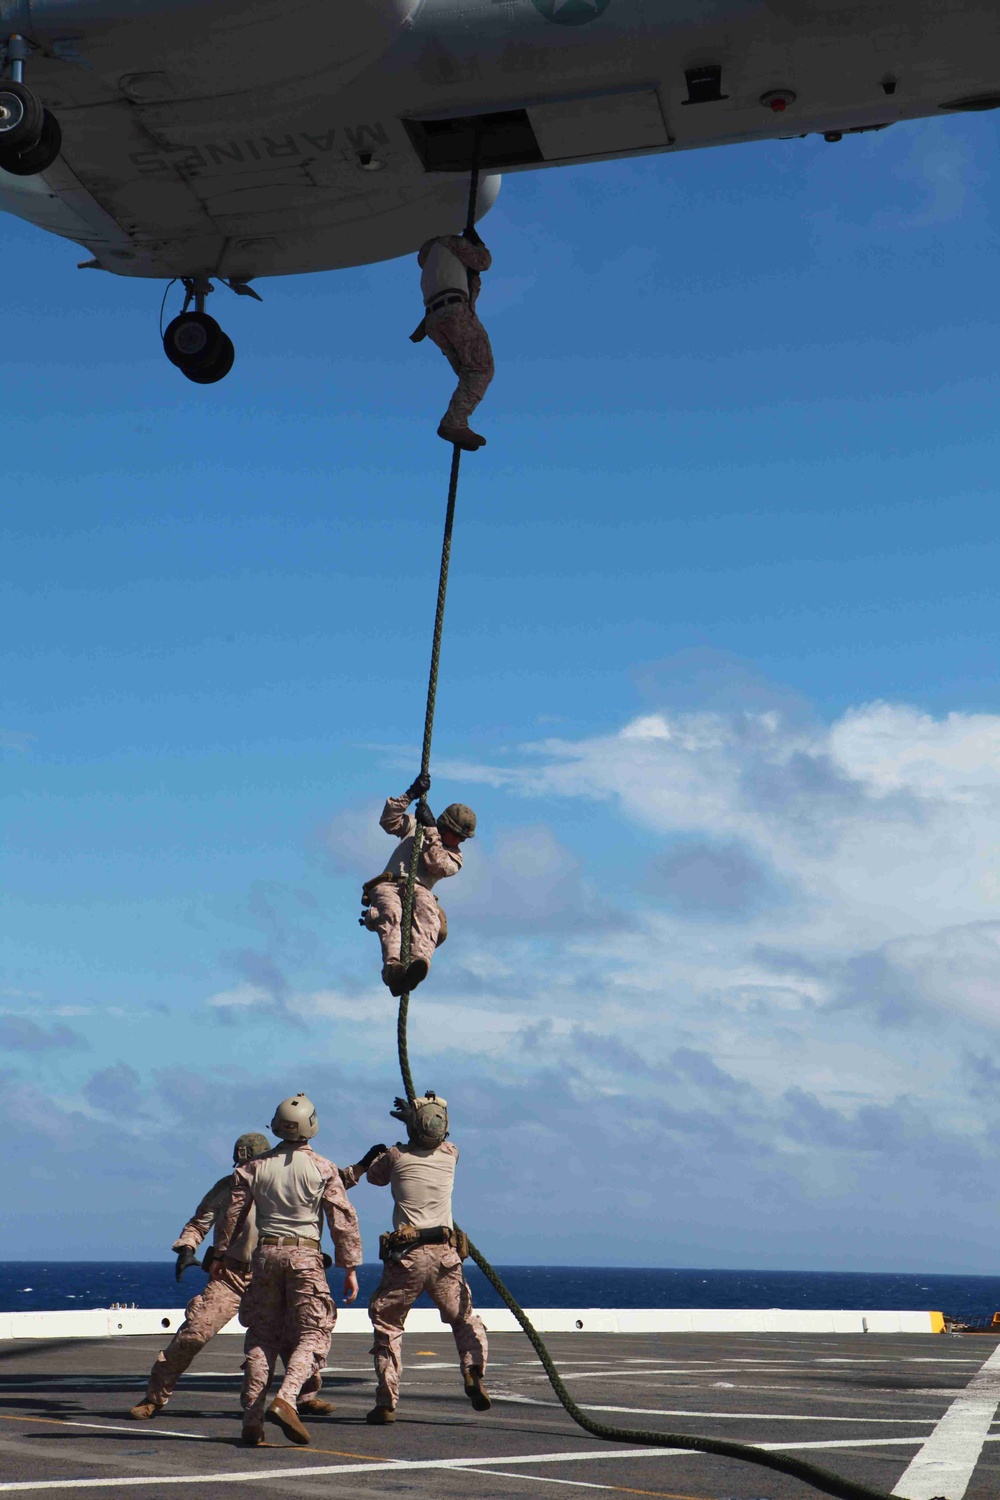 Raid force fast-ropes aboard USS New Orleans